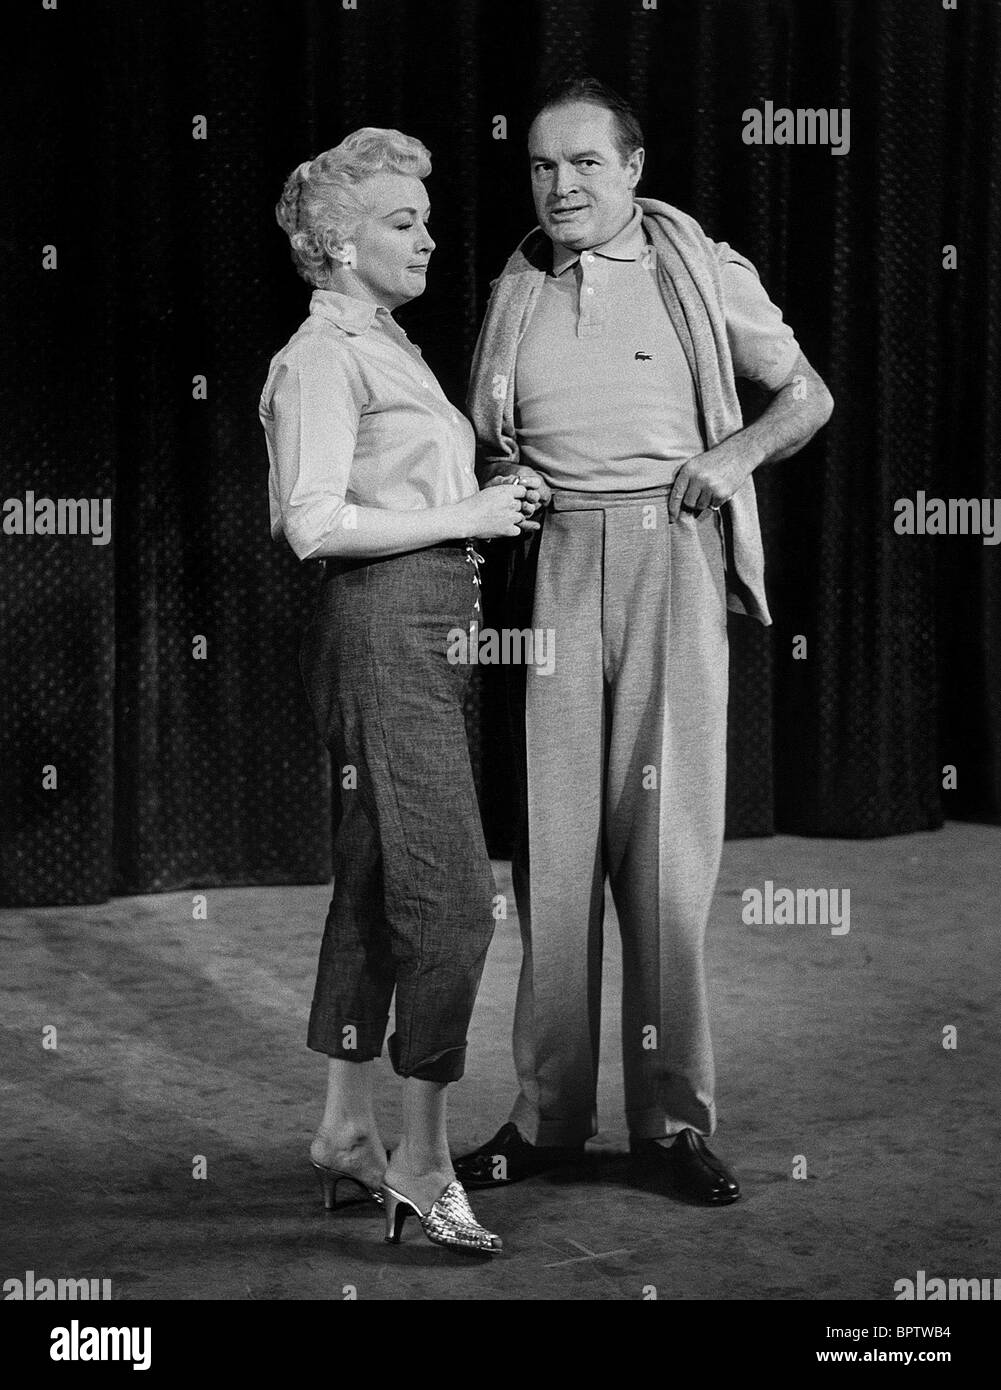 BETTY GRABLE & BOB HOPE ACTRESS WITH ACTOR (1954) Stock Photo